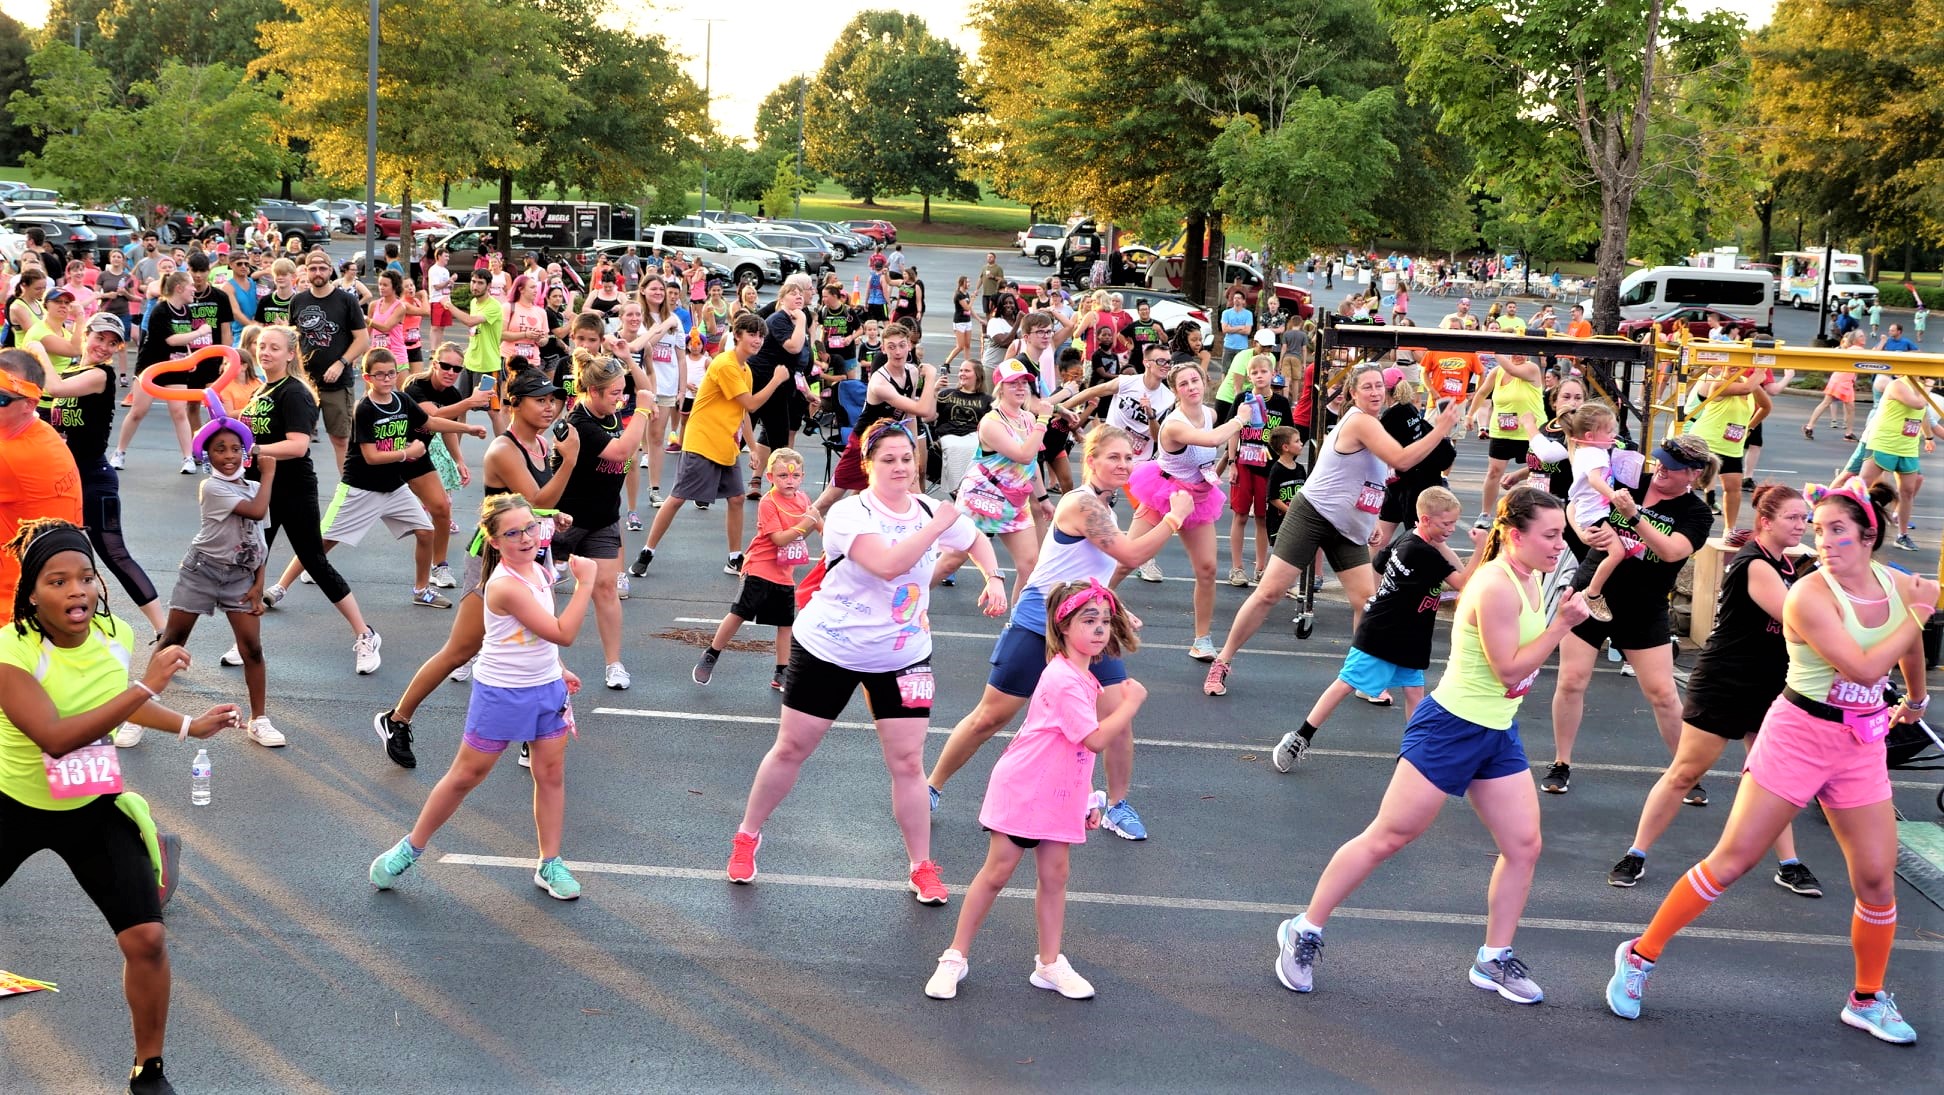 Glow Run 5K results in $80K for Downtown Rescue Mission - The Madison ...